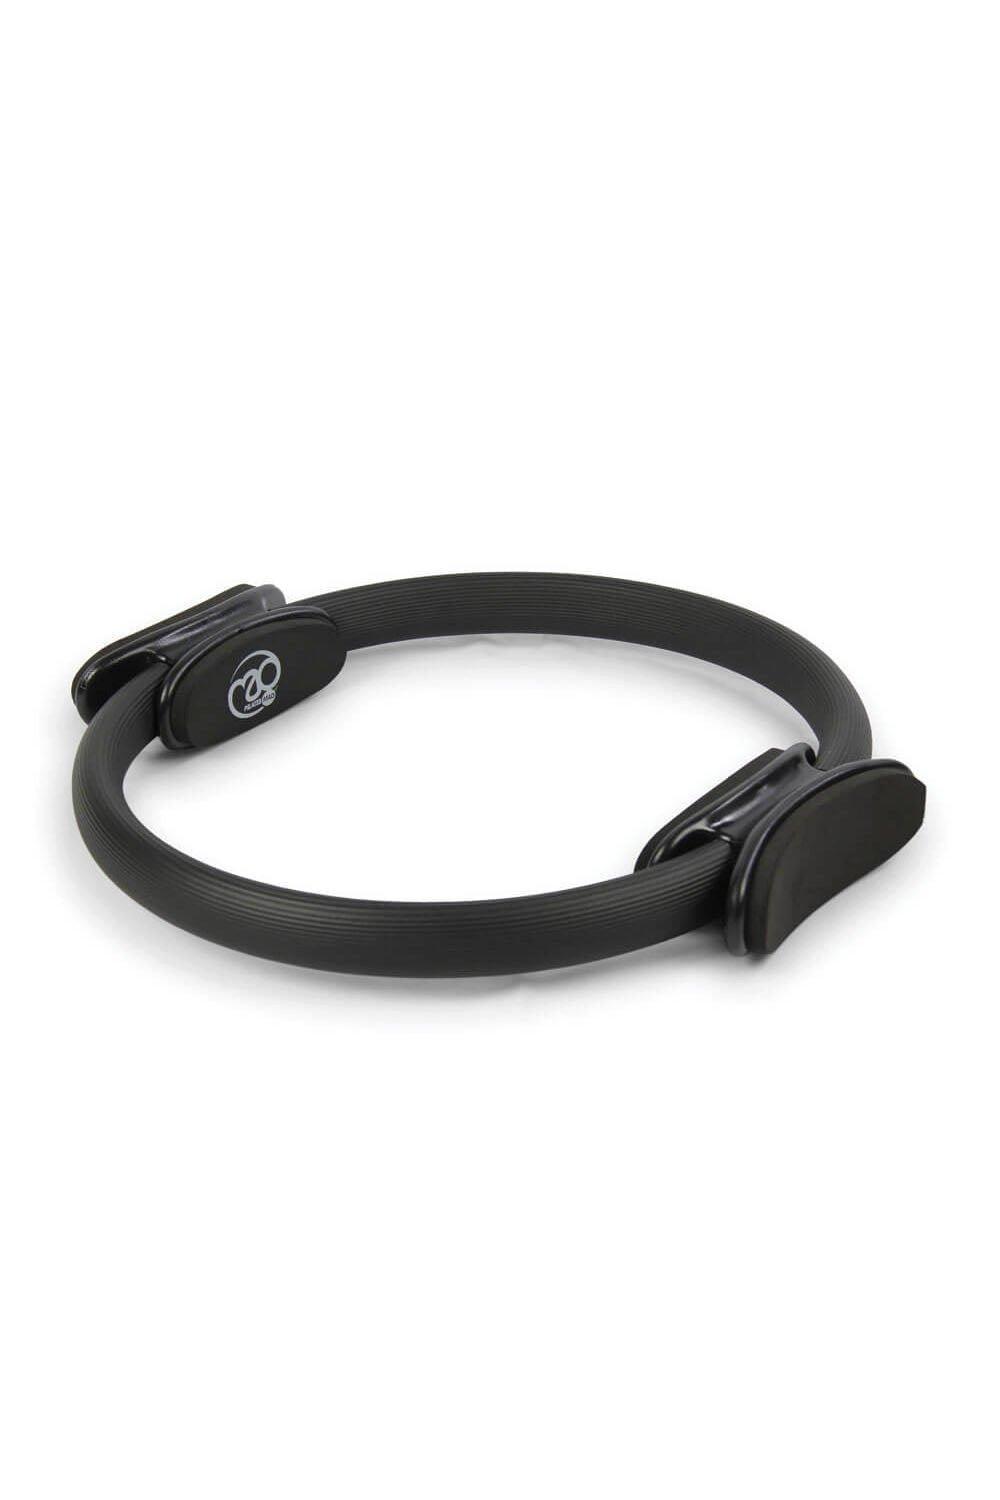 Fitness Mad Double Handle Pilates Ring|black